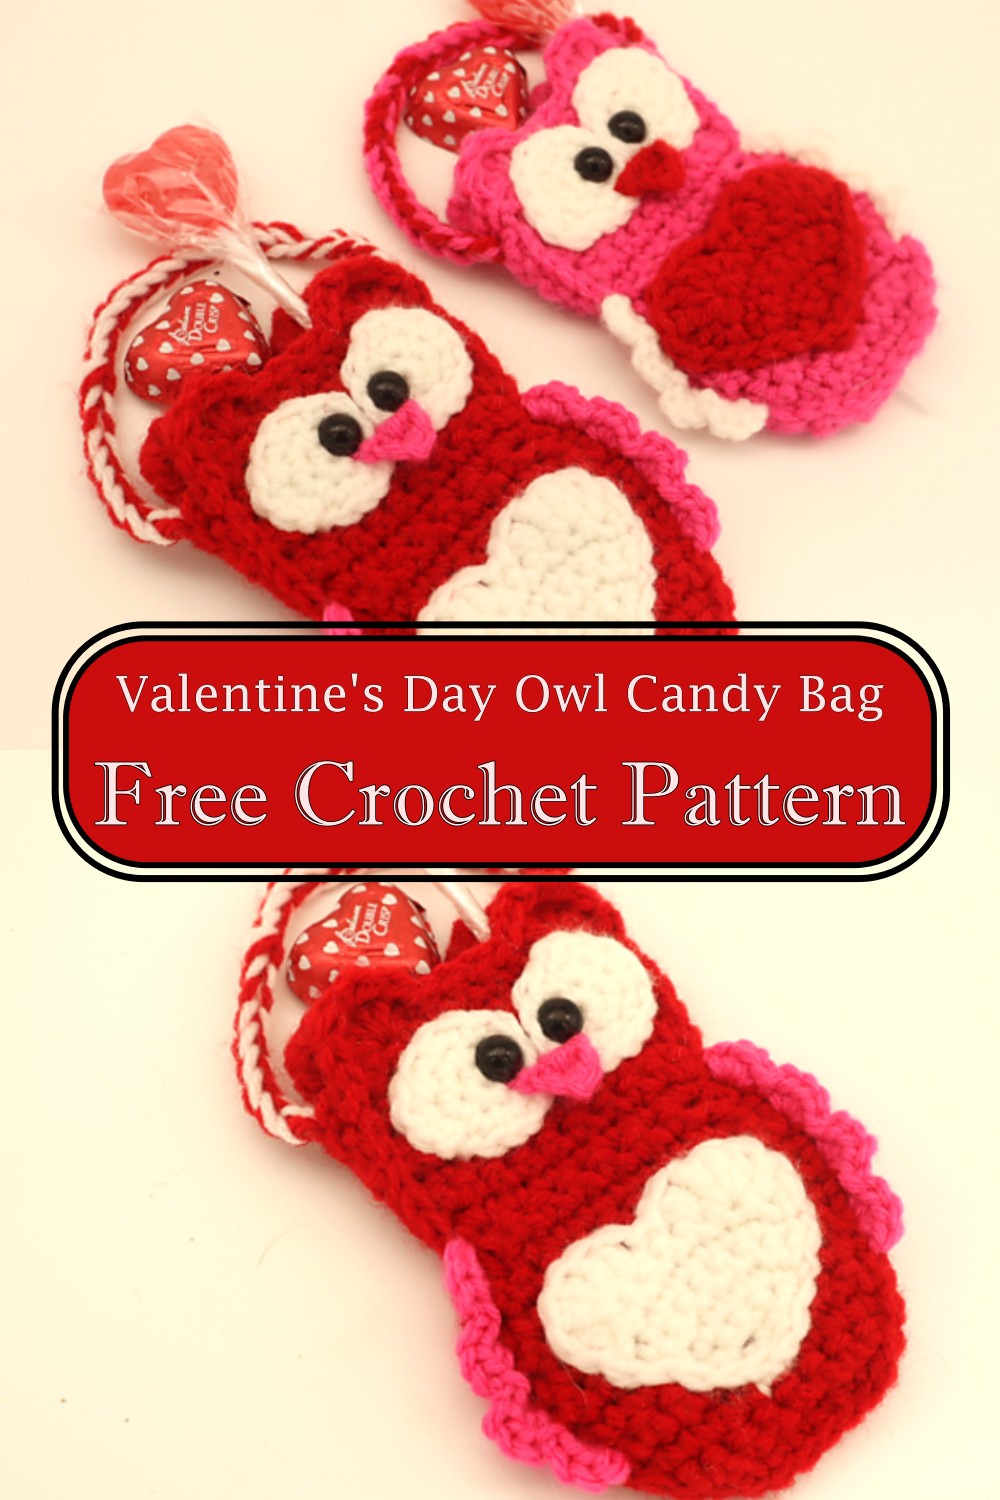 Valentine's Day Owl Candy Bag